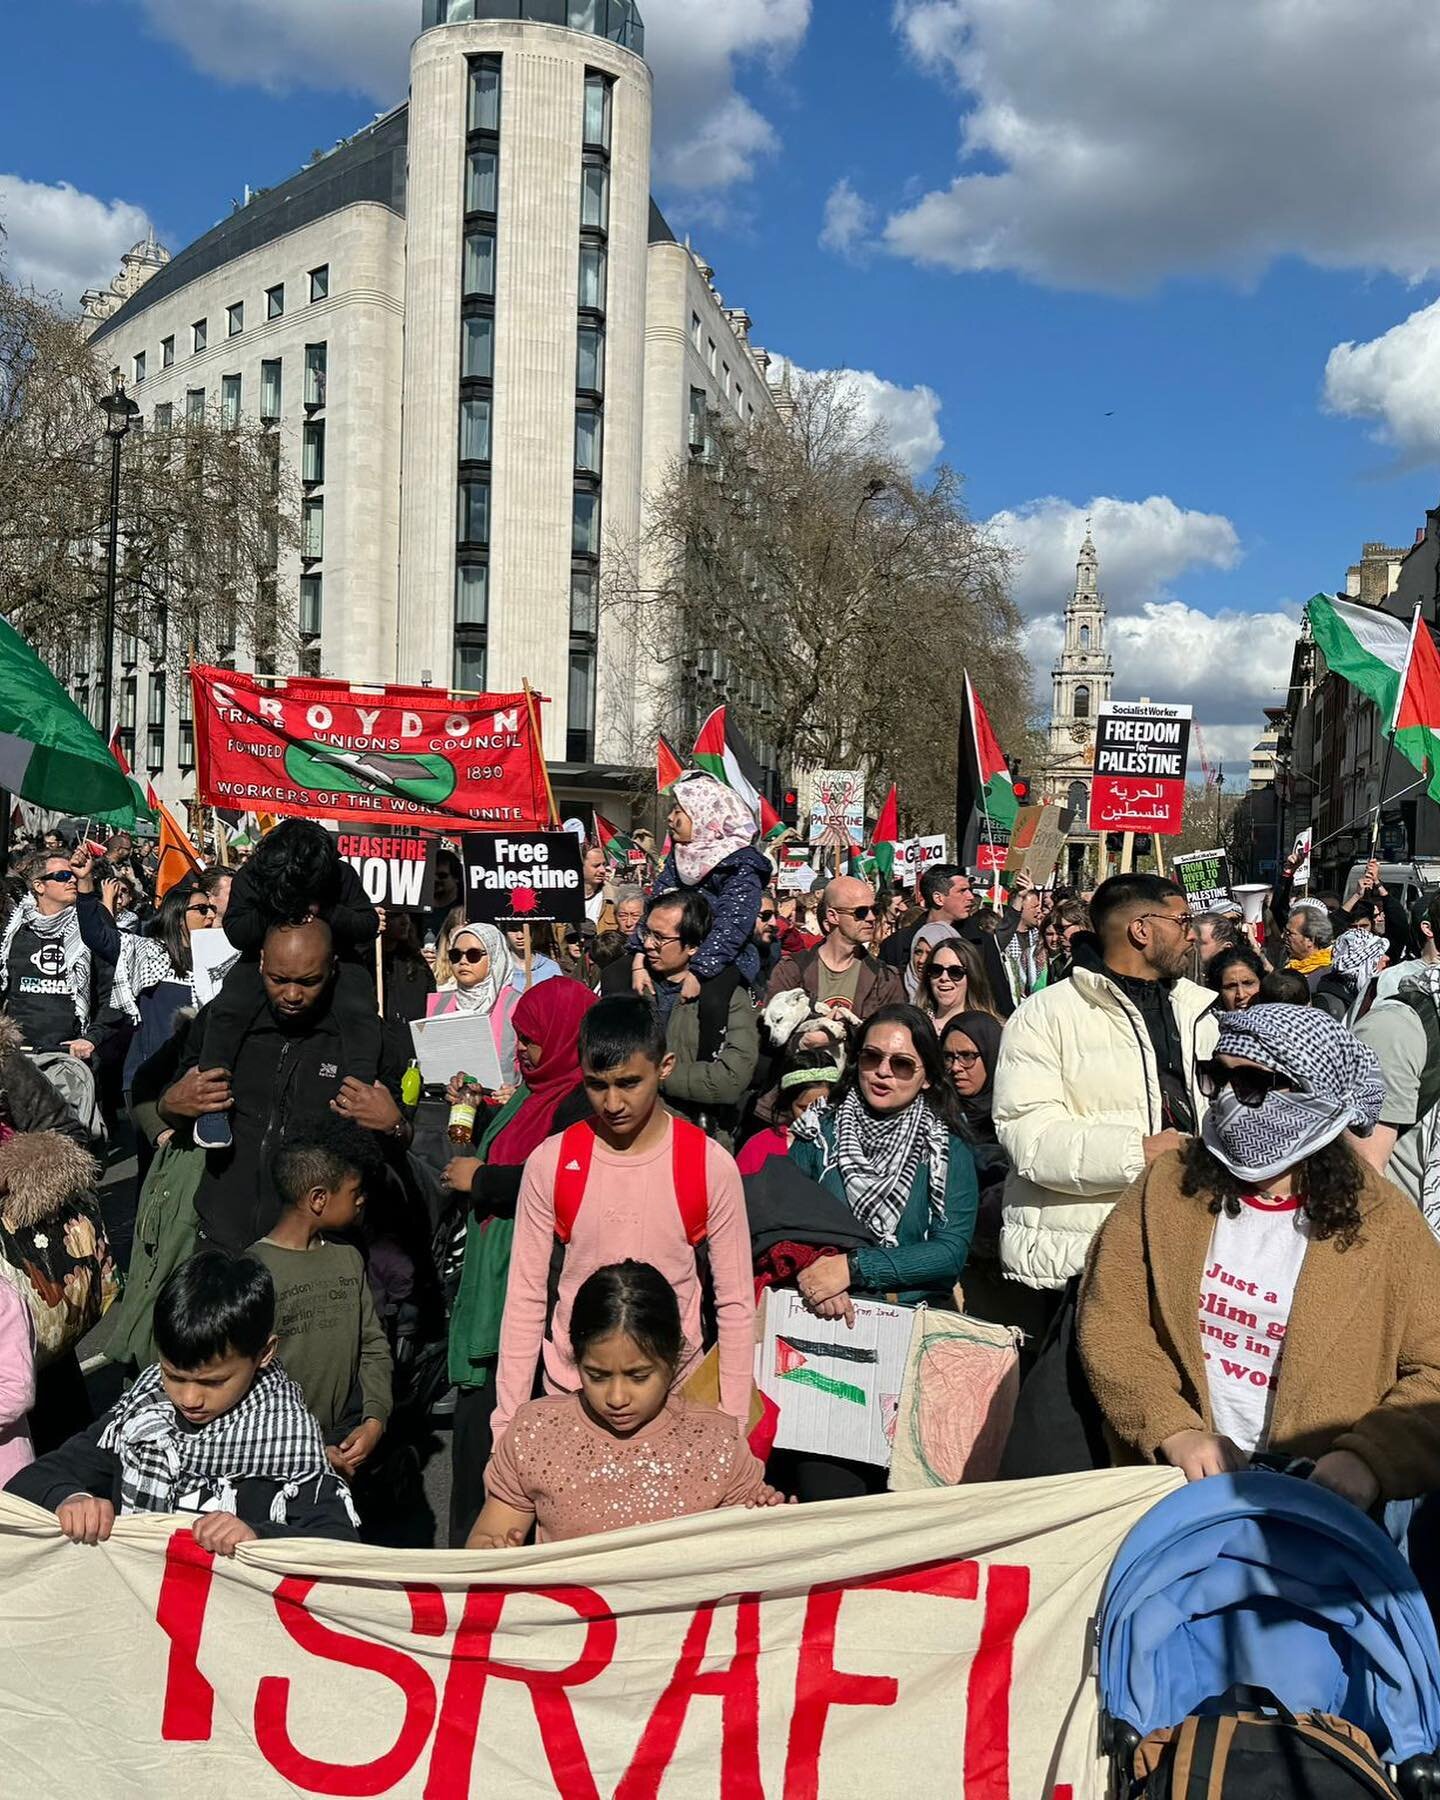 Today we held the tenth Parents &amp; Families bloc. It is hard to conceive that we&rsquo;ve been marching together for six months in the face of worsening atrocities in Gaza. Today&rsquo;s march has added significance. 30th March marks Land Day in G